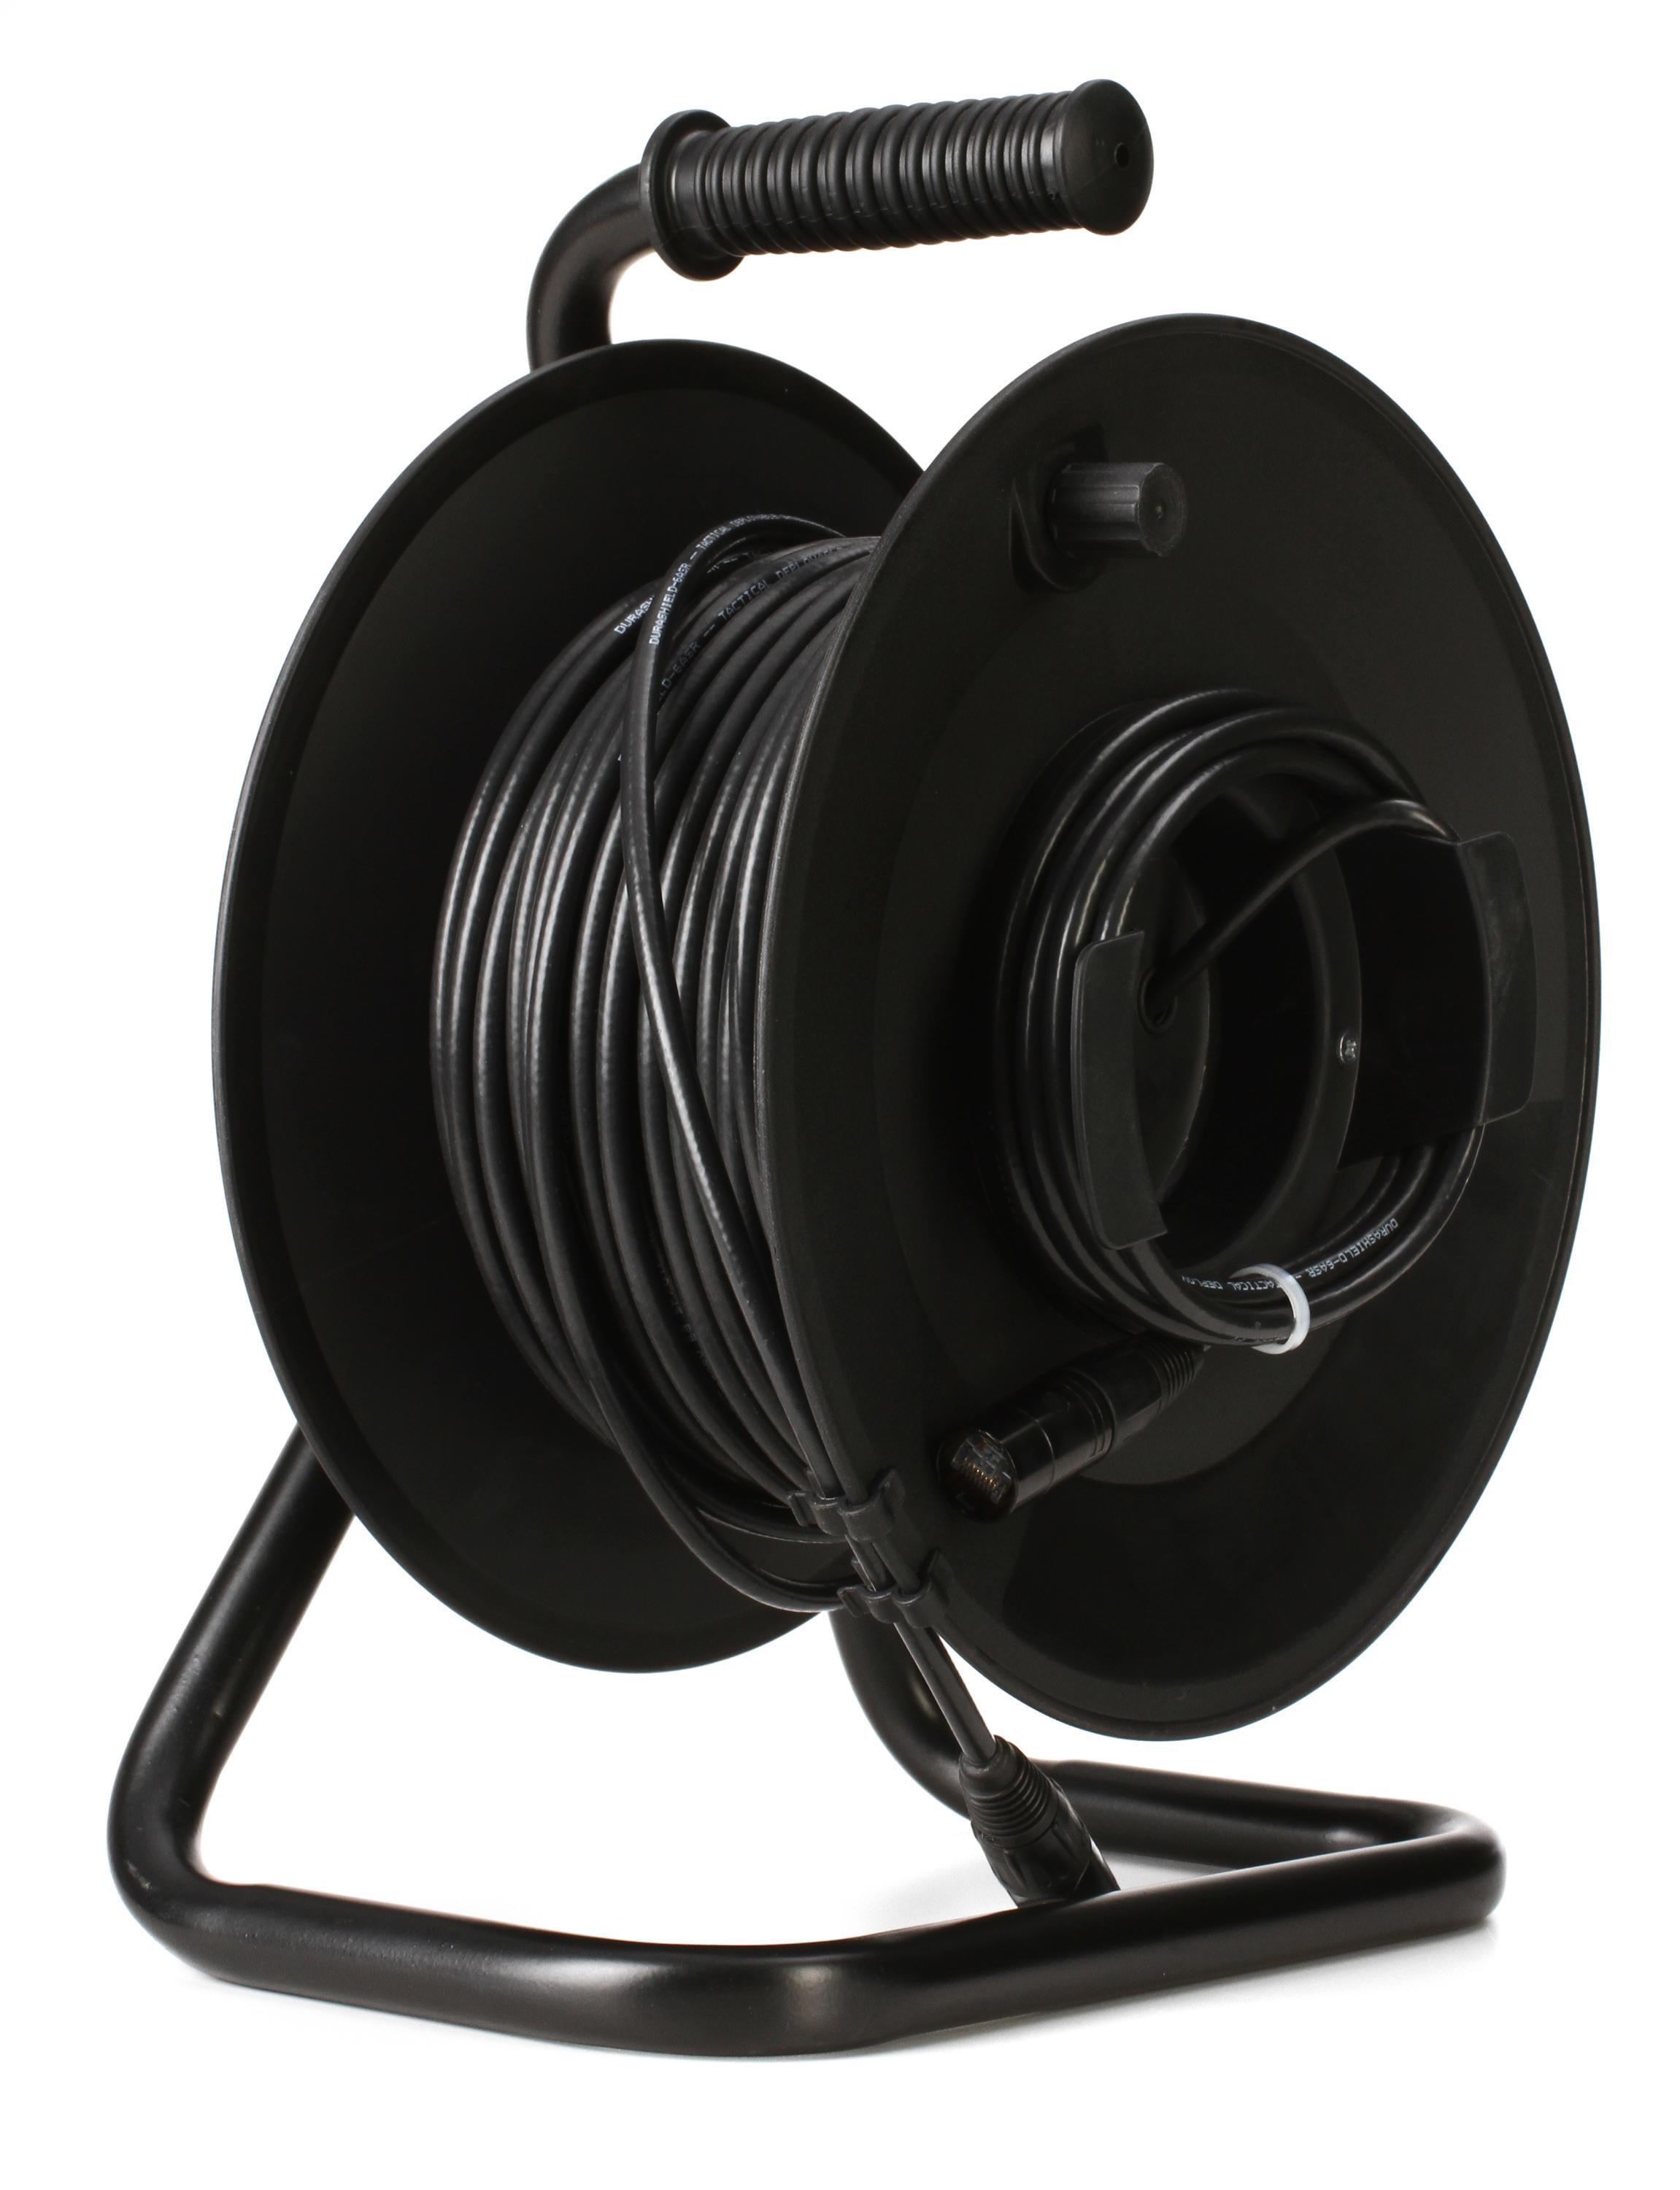 Pro Co DURASHIELD-150NBNB-R Cat 6A etherCON Cable on a Reel - 150